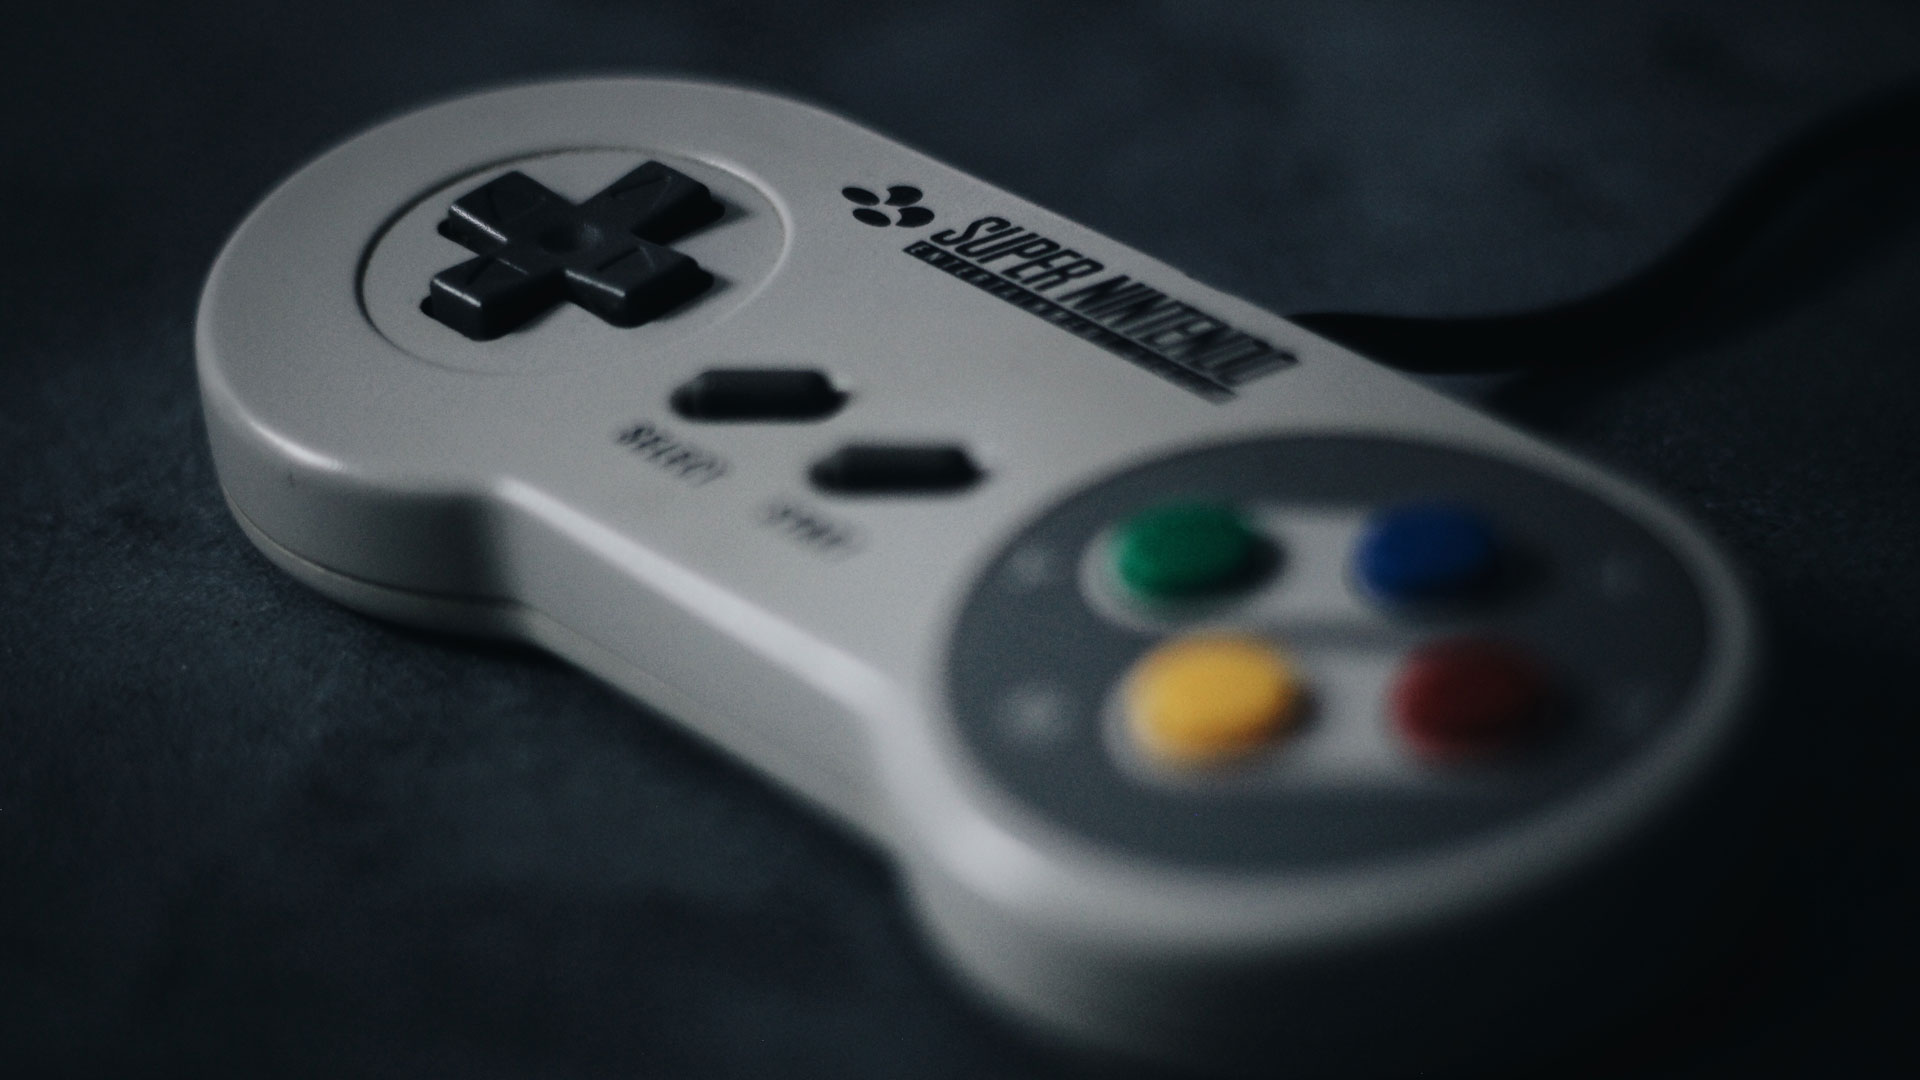 How to Play SNES Games on PC with ZSNES Emulator